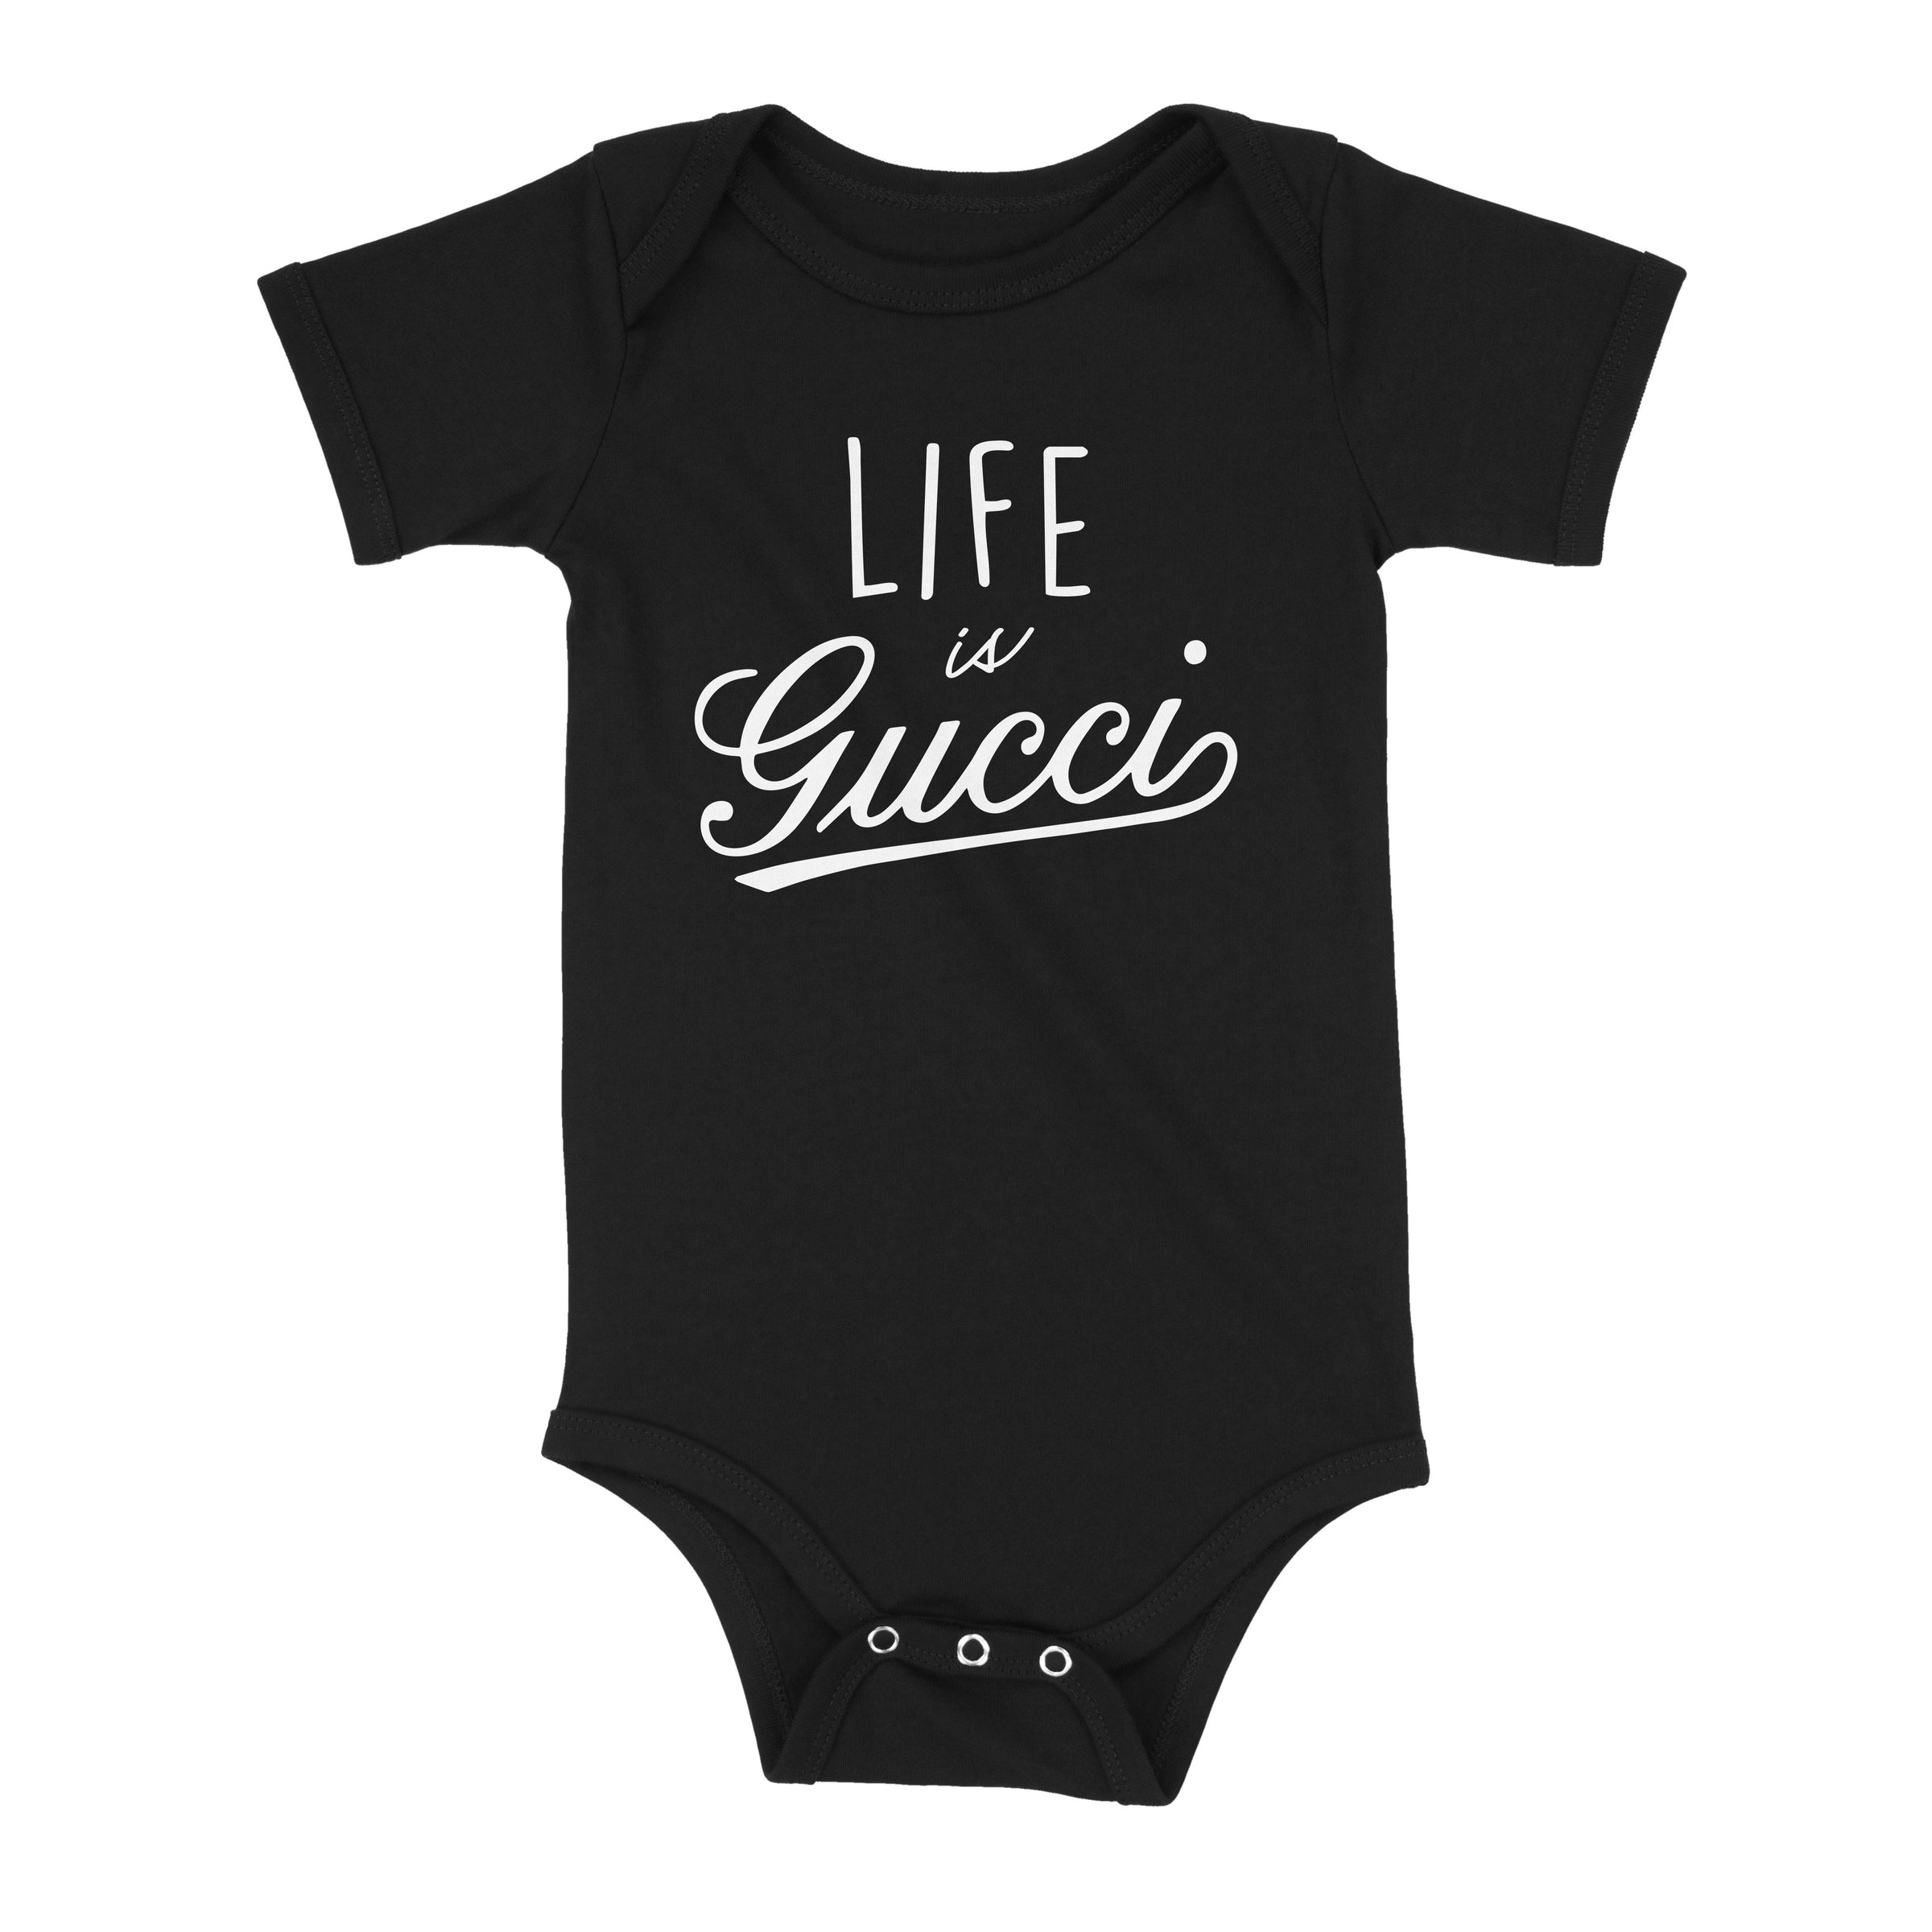 life is gucci baby shirt